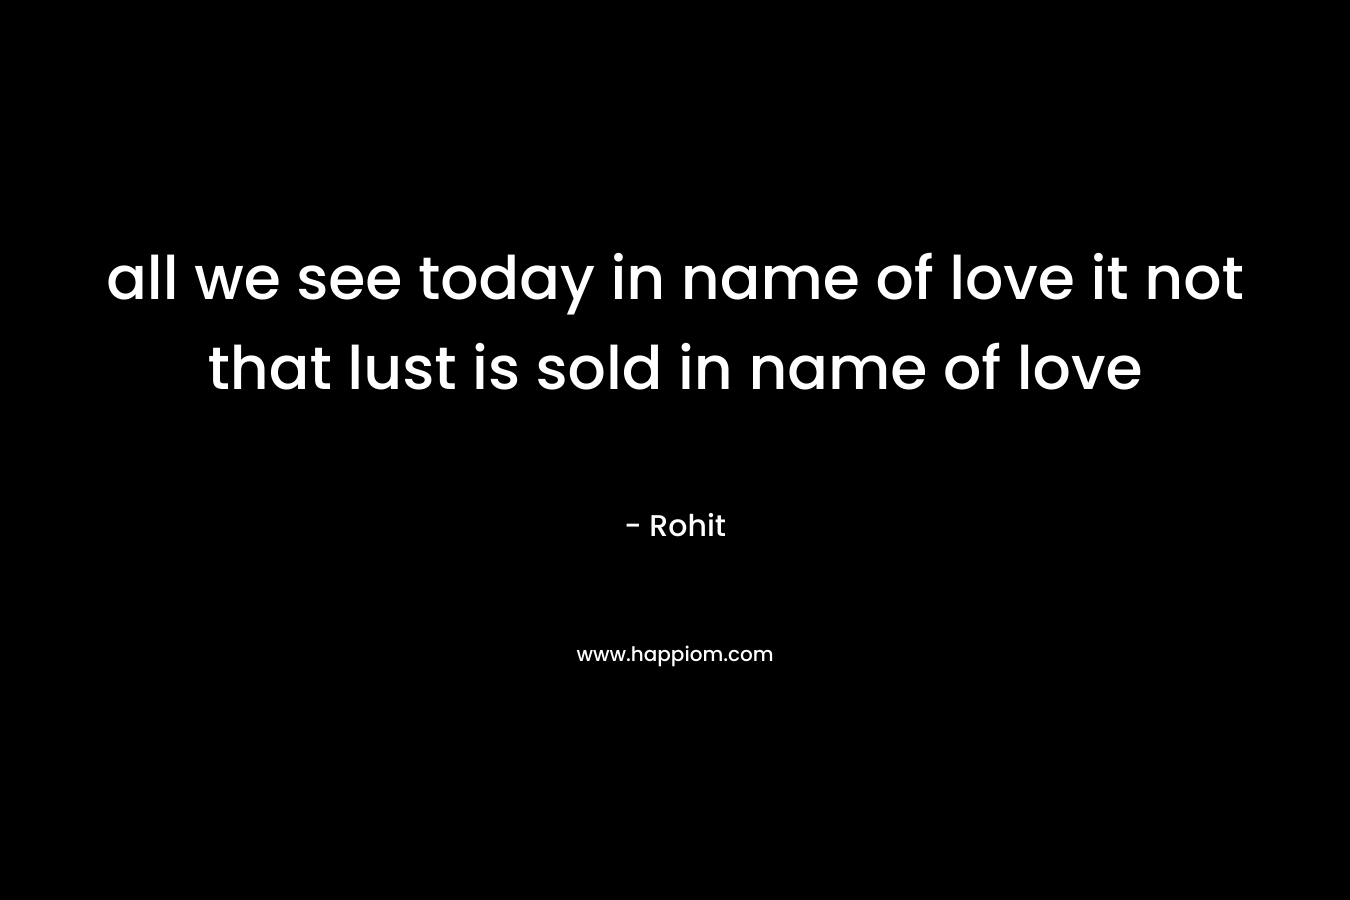 all we see today in name of love it not that lust is sold in name of love